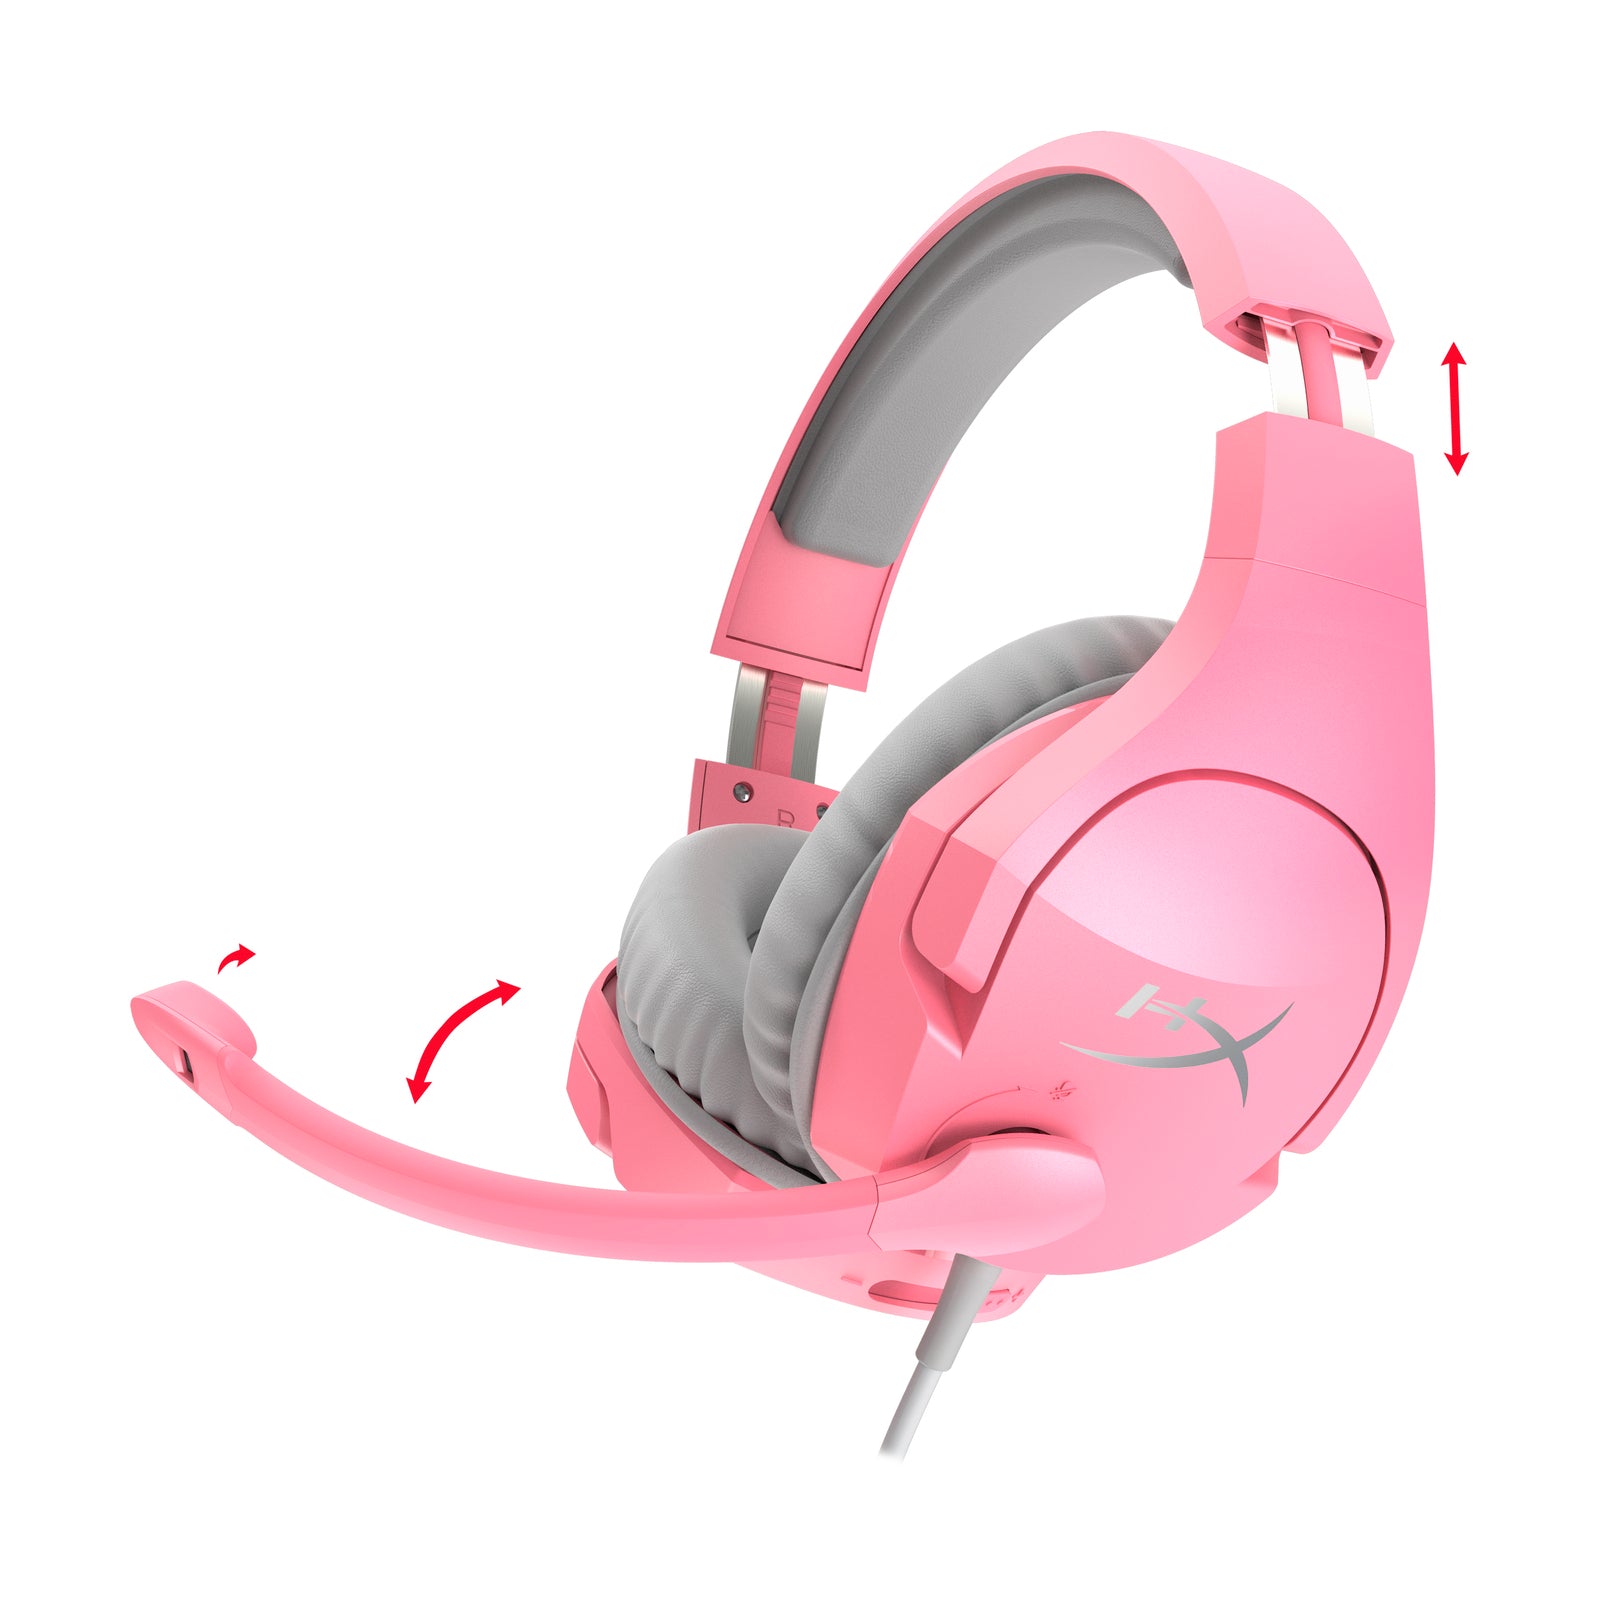 Cloud Stinger - Comfortable ROW HyperX Headsets Gaming – HyperX 